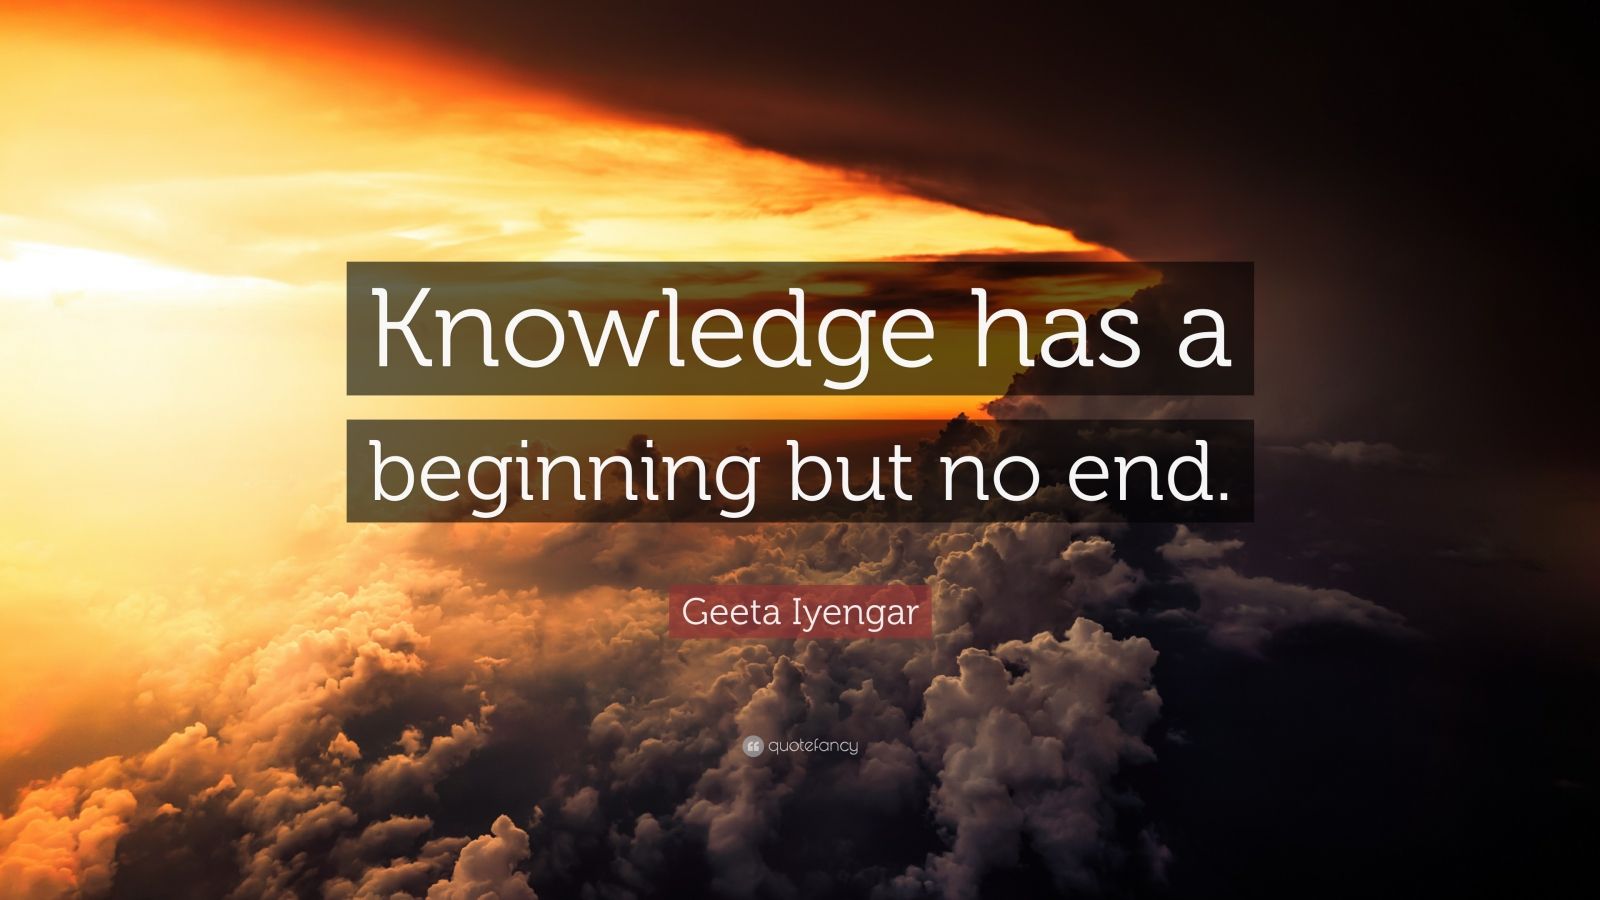 Geeta Iyengar Quote: “Knowledge has a beginning but no end.” (9